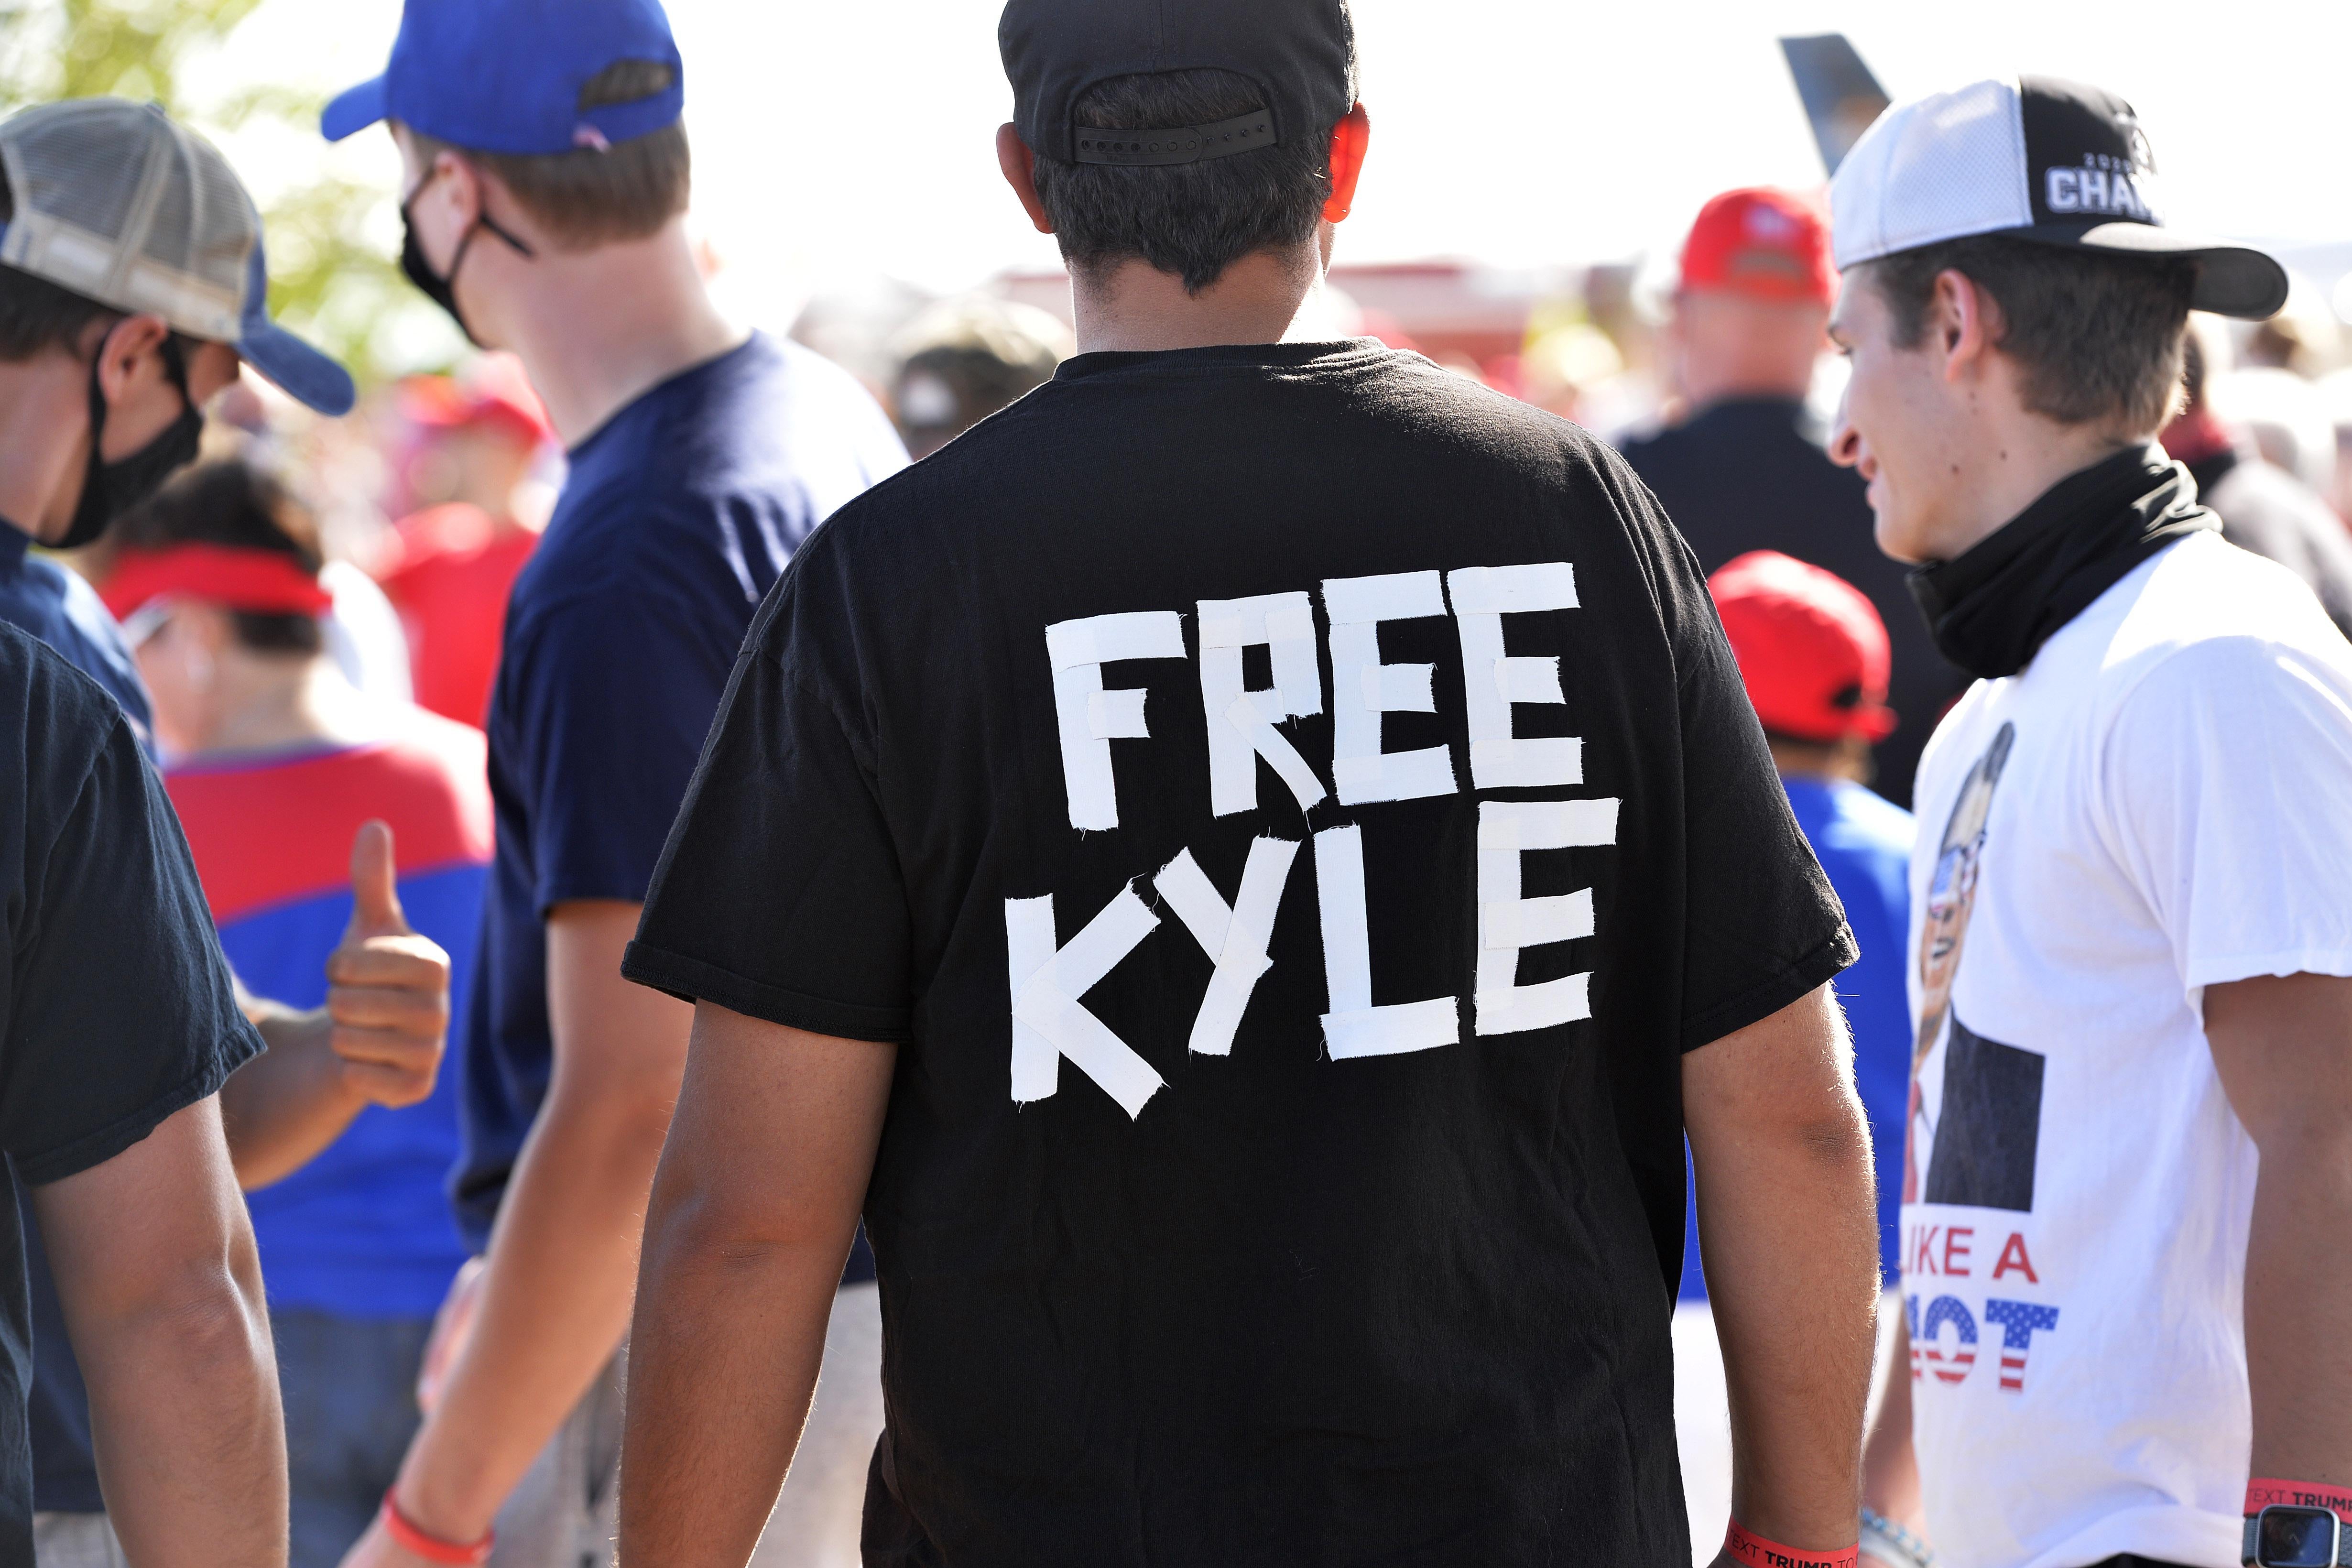 A man wears a shirt calling for freedom for Kyle Rittenhouse, 17, the man who allegedly shot protesters in Wisconsin, during a President Donald Trump campaign rally at Manchester airport in Londonderry, New Hampshire on August 28, 2020. 